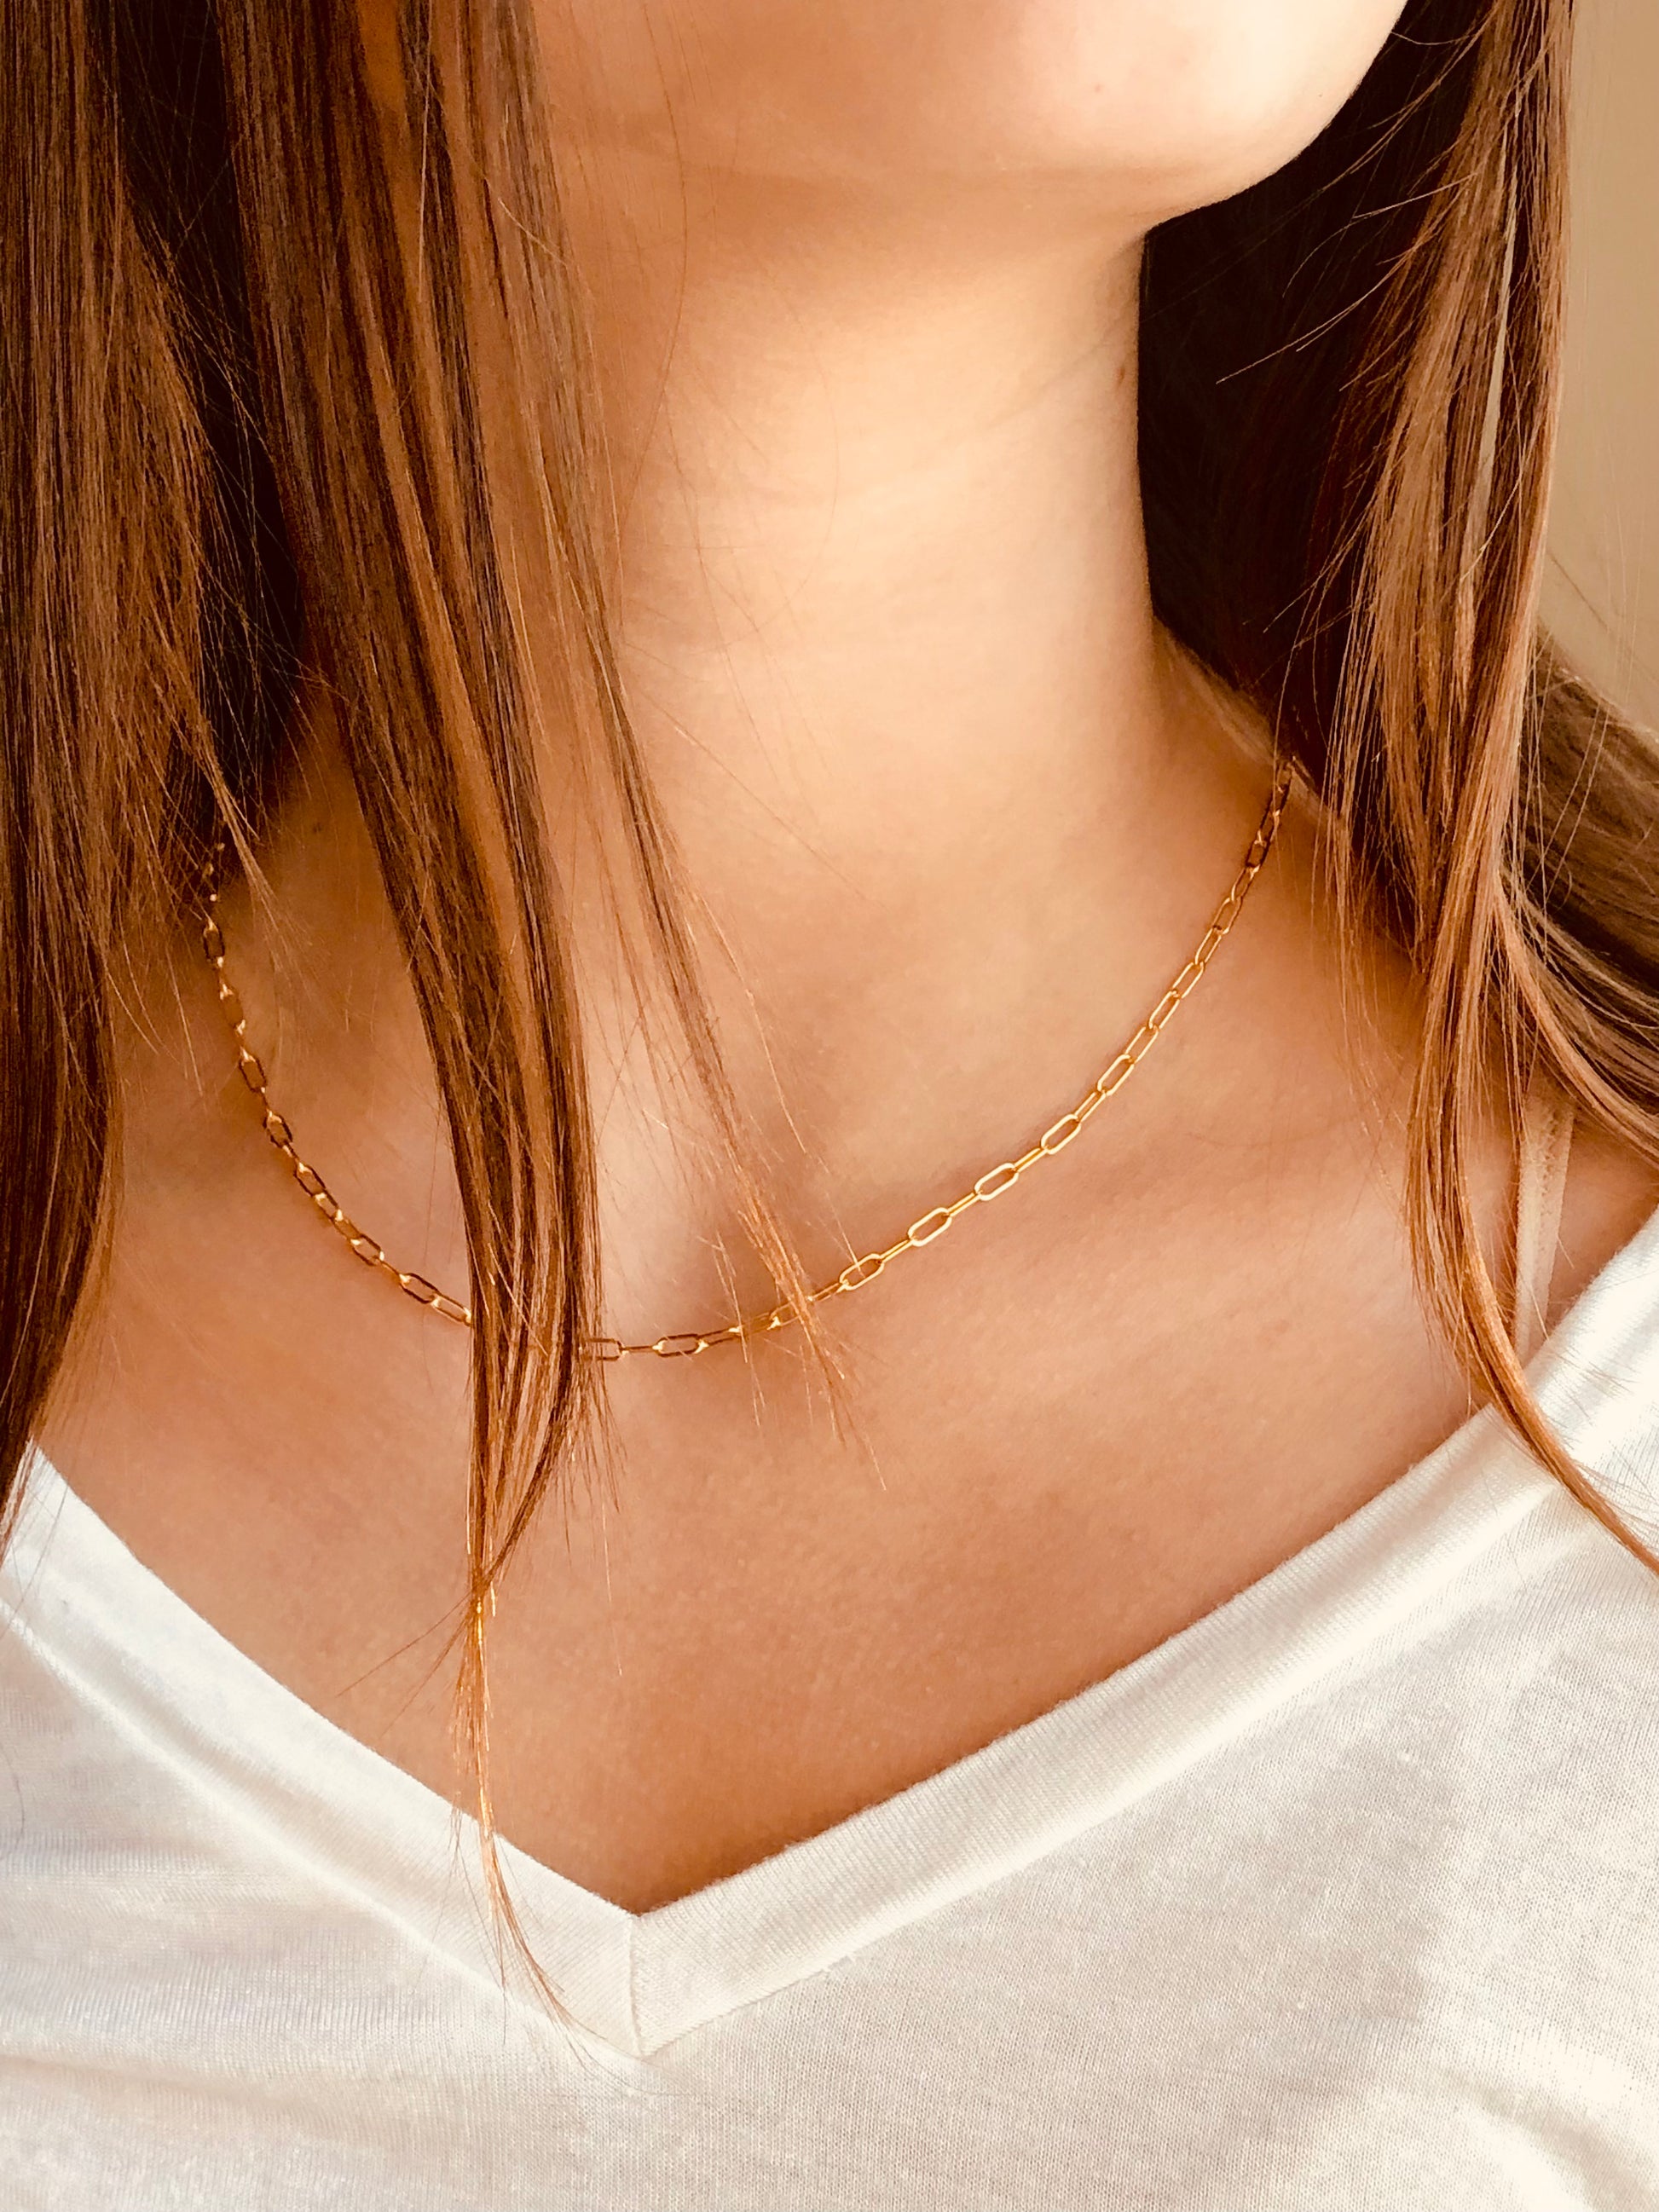 Paperclip Necklace, Link Choker Necklace, Link Necklace, Gold Link Choker, Choker Necklace, Link Chain Necklace, Everyday Jewelry